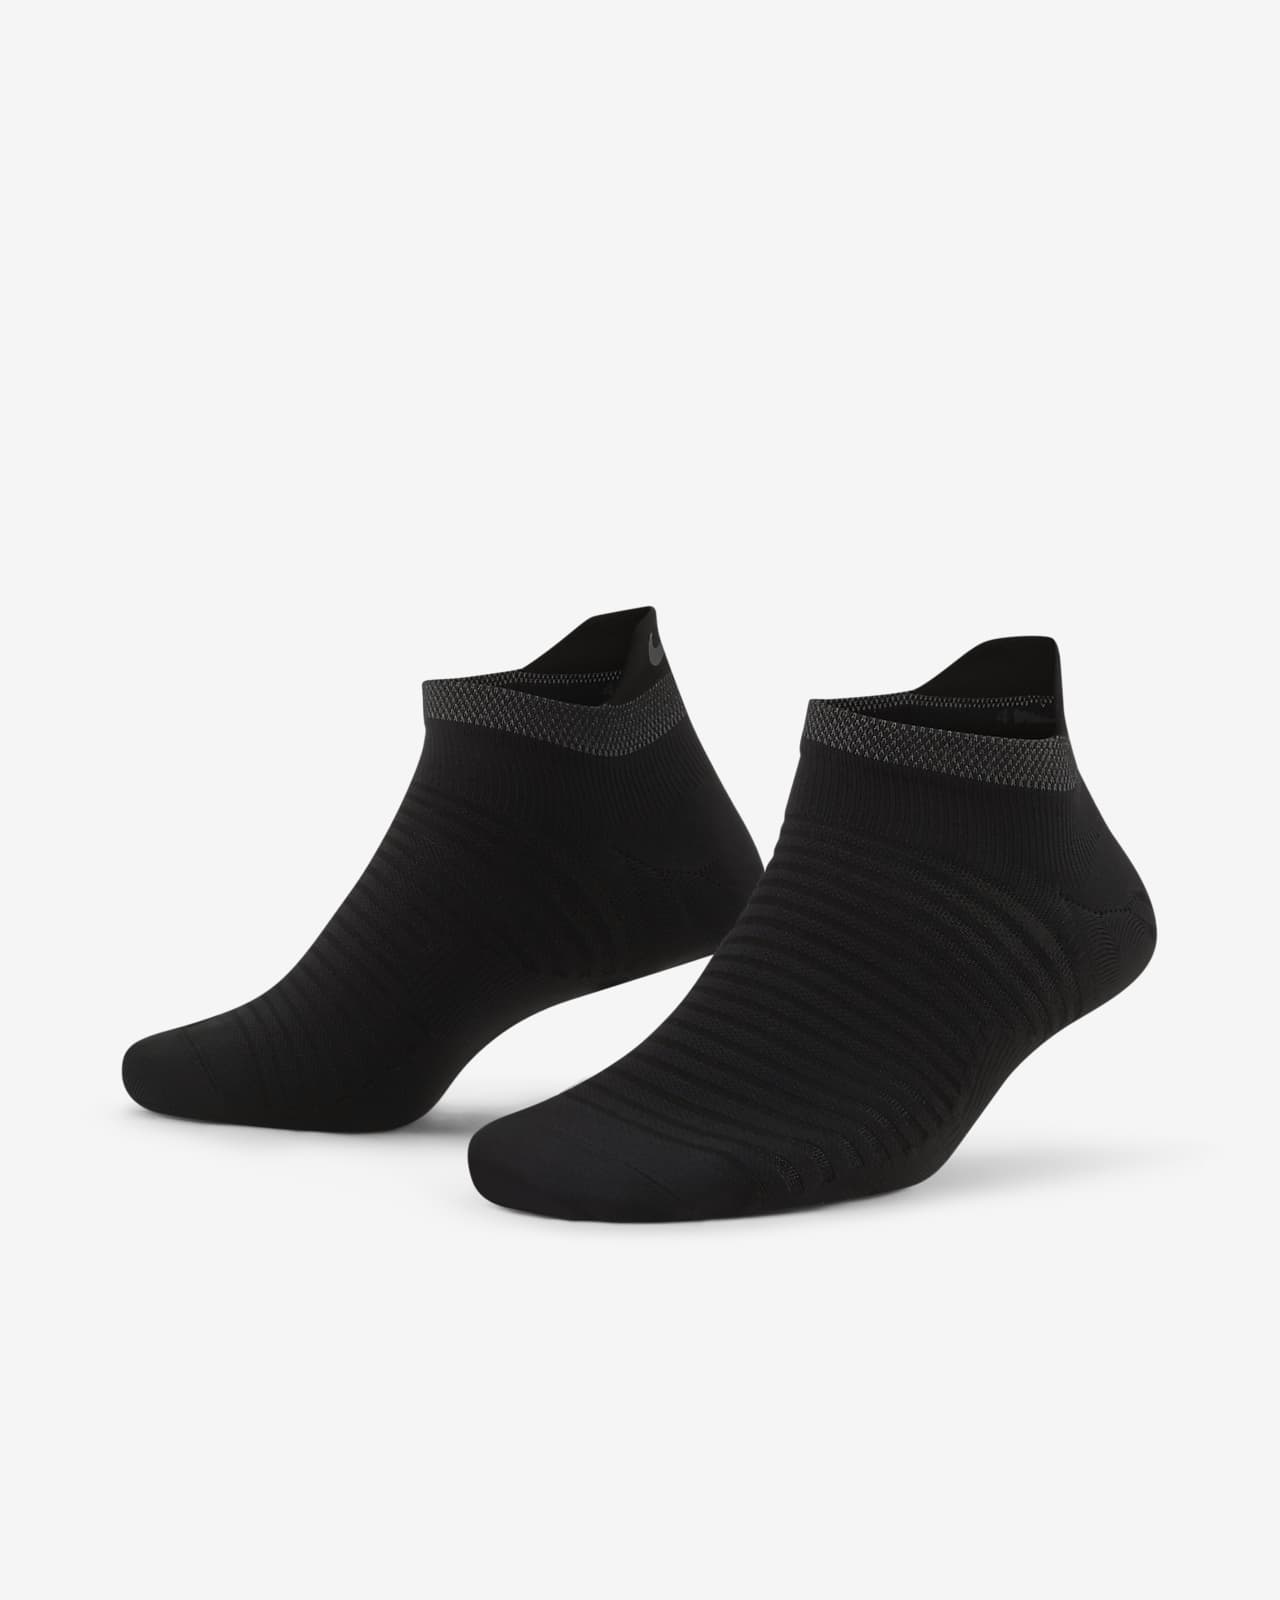 Chaussettes de running invisibles Nike Spark Lightweight